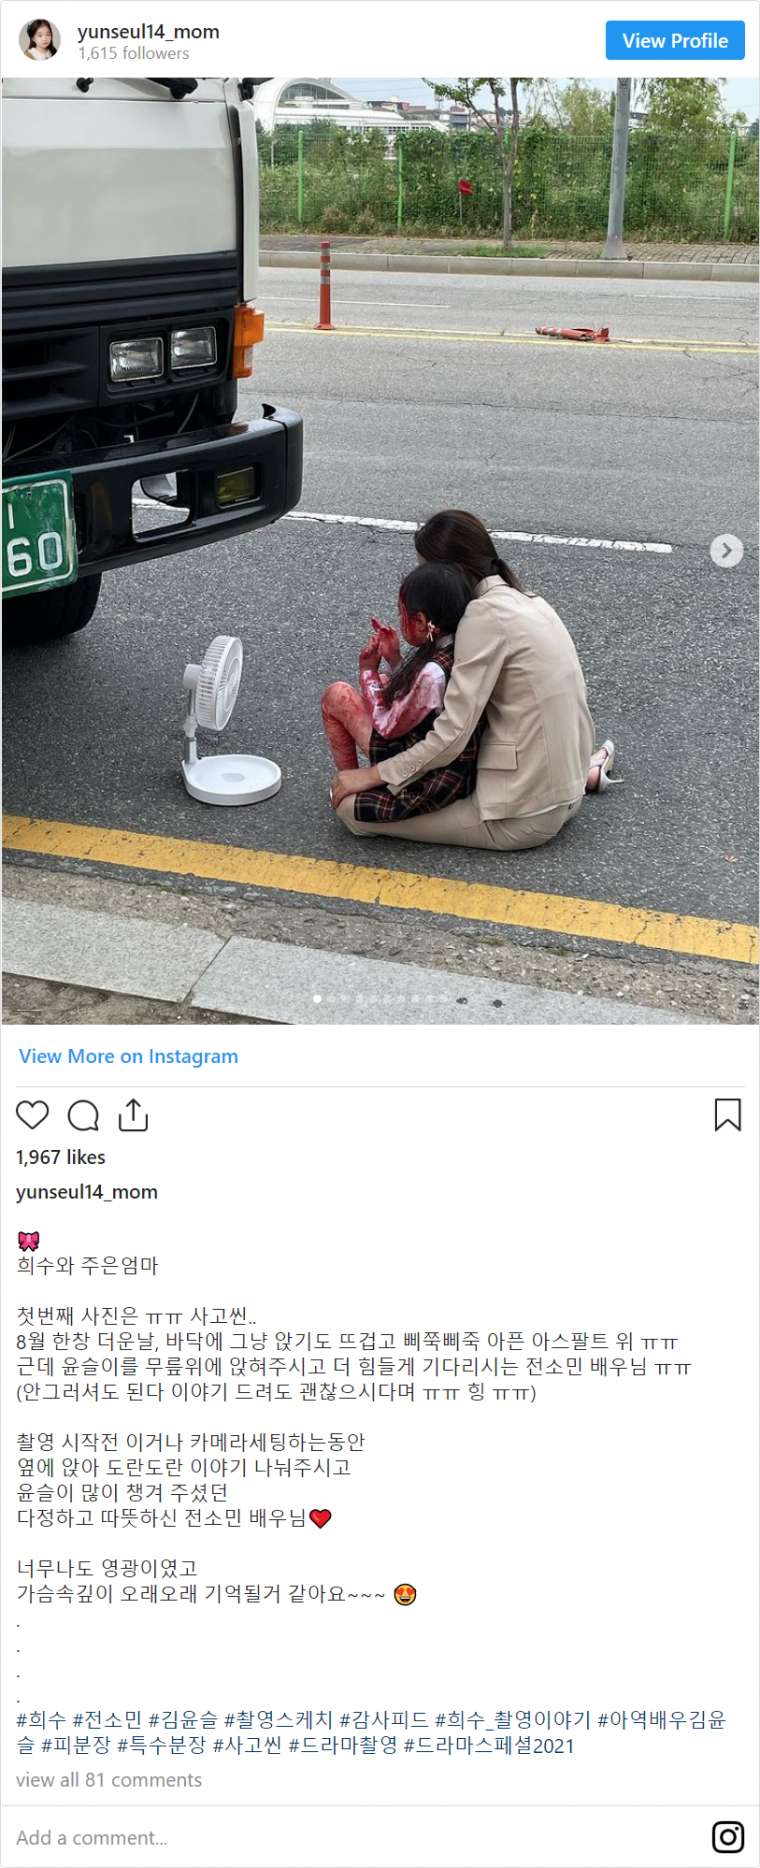 Posted on Instagram by a child actor's mother who filmed a drama with Jeon So Min.